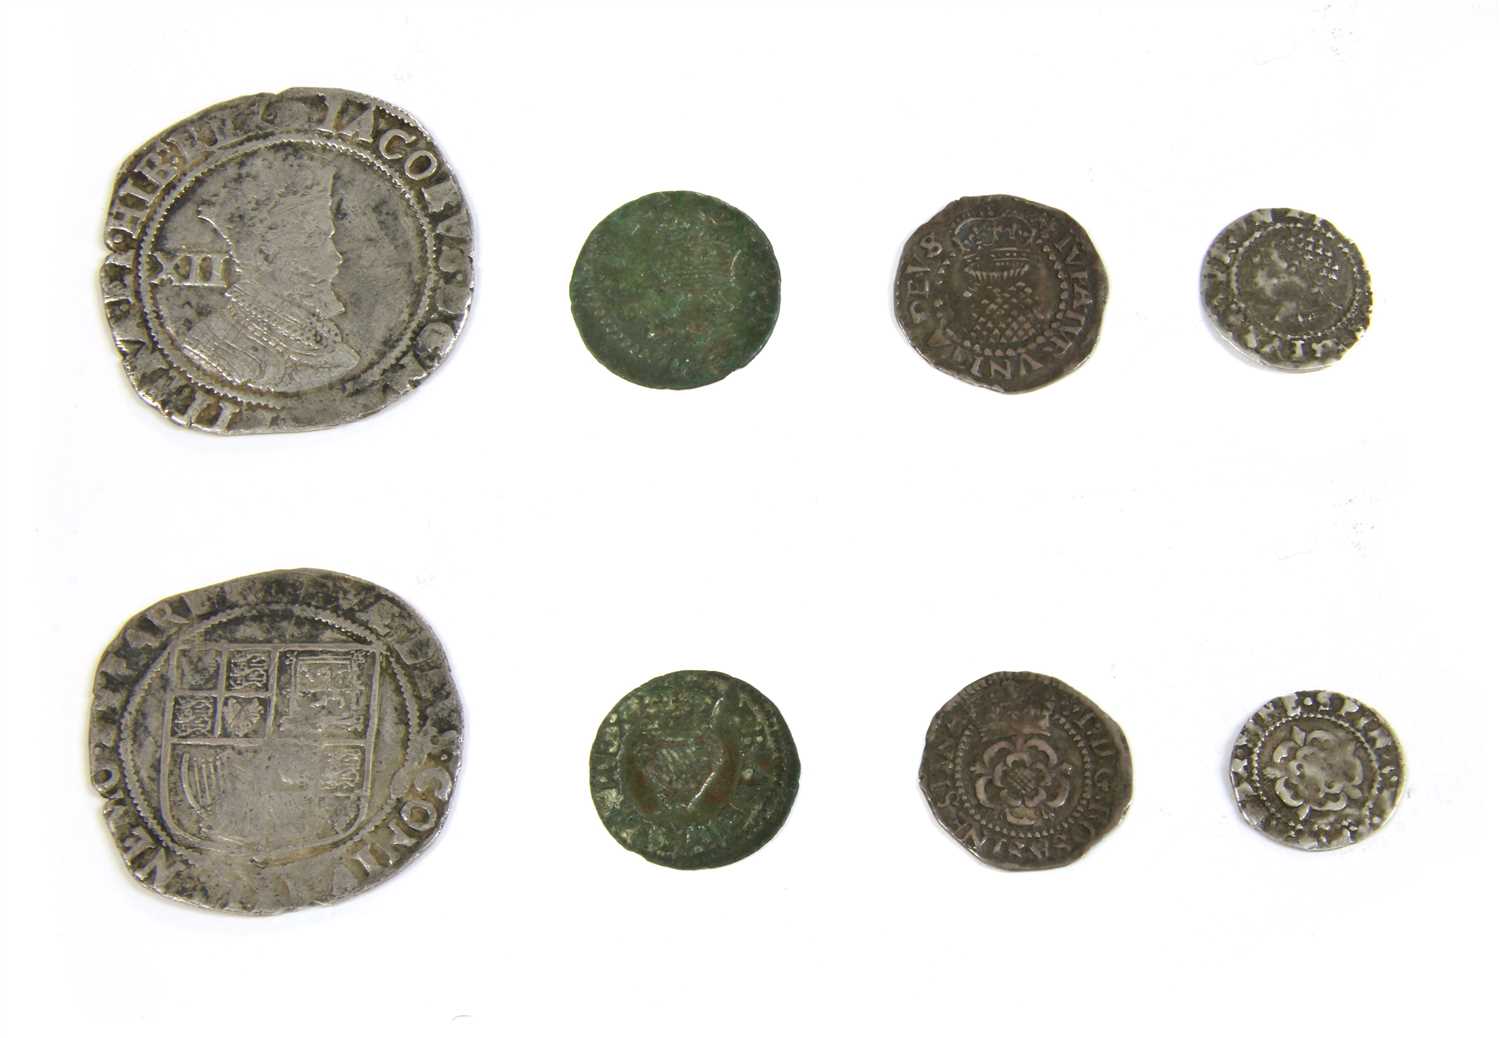 Lot 33 - Coins, Great Britain, James I (1603-1625)